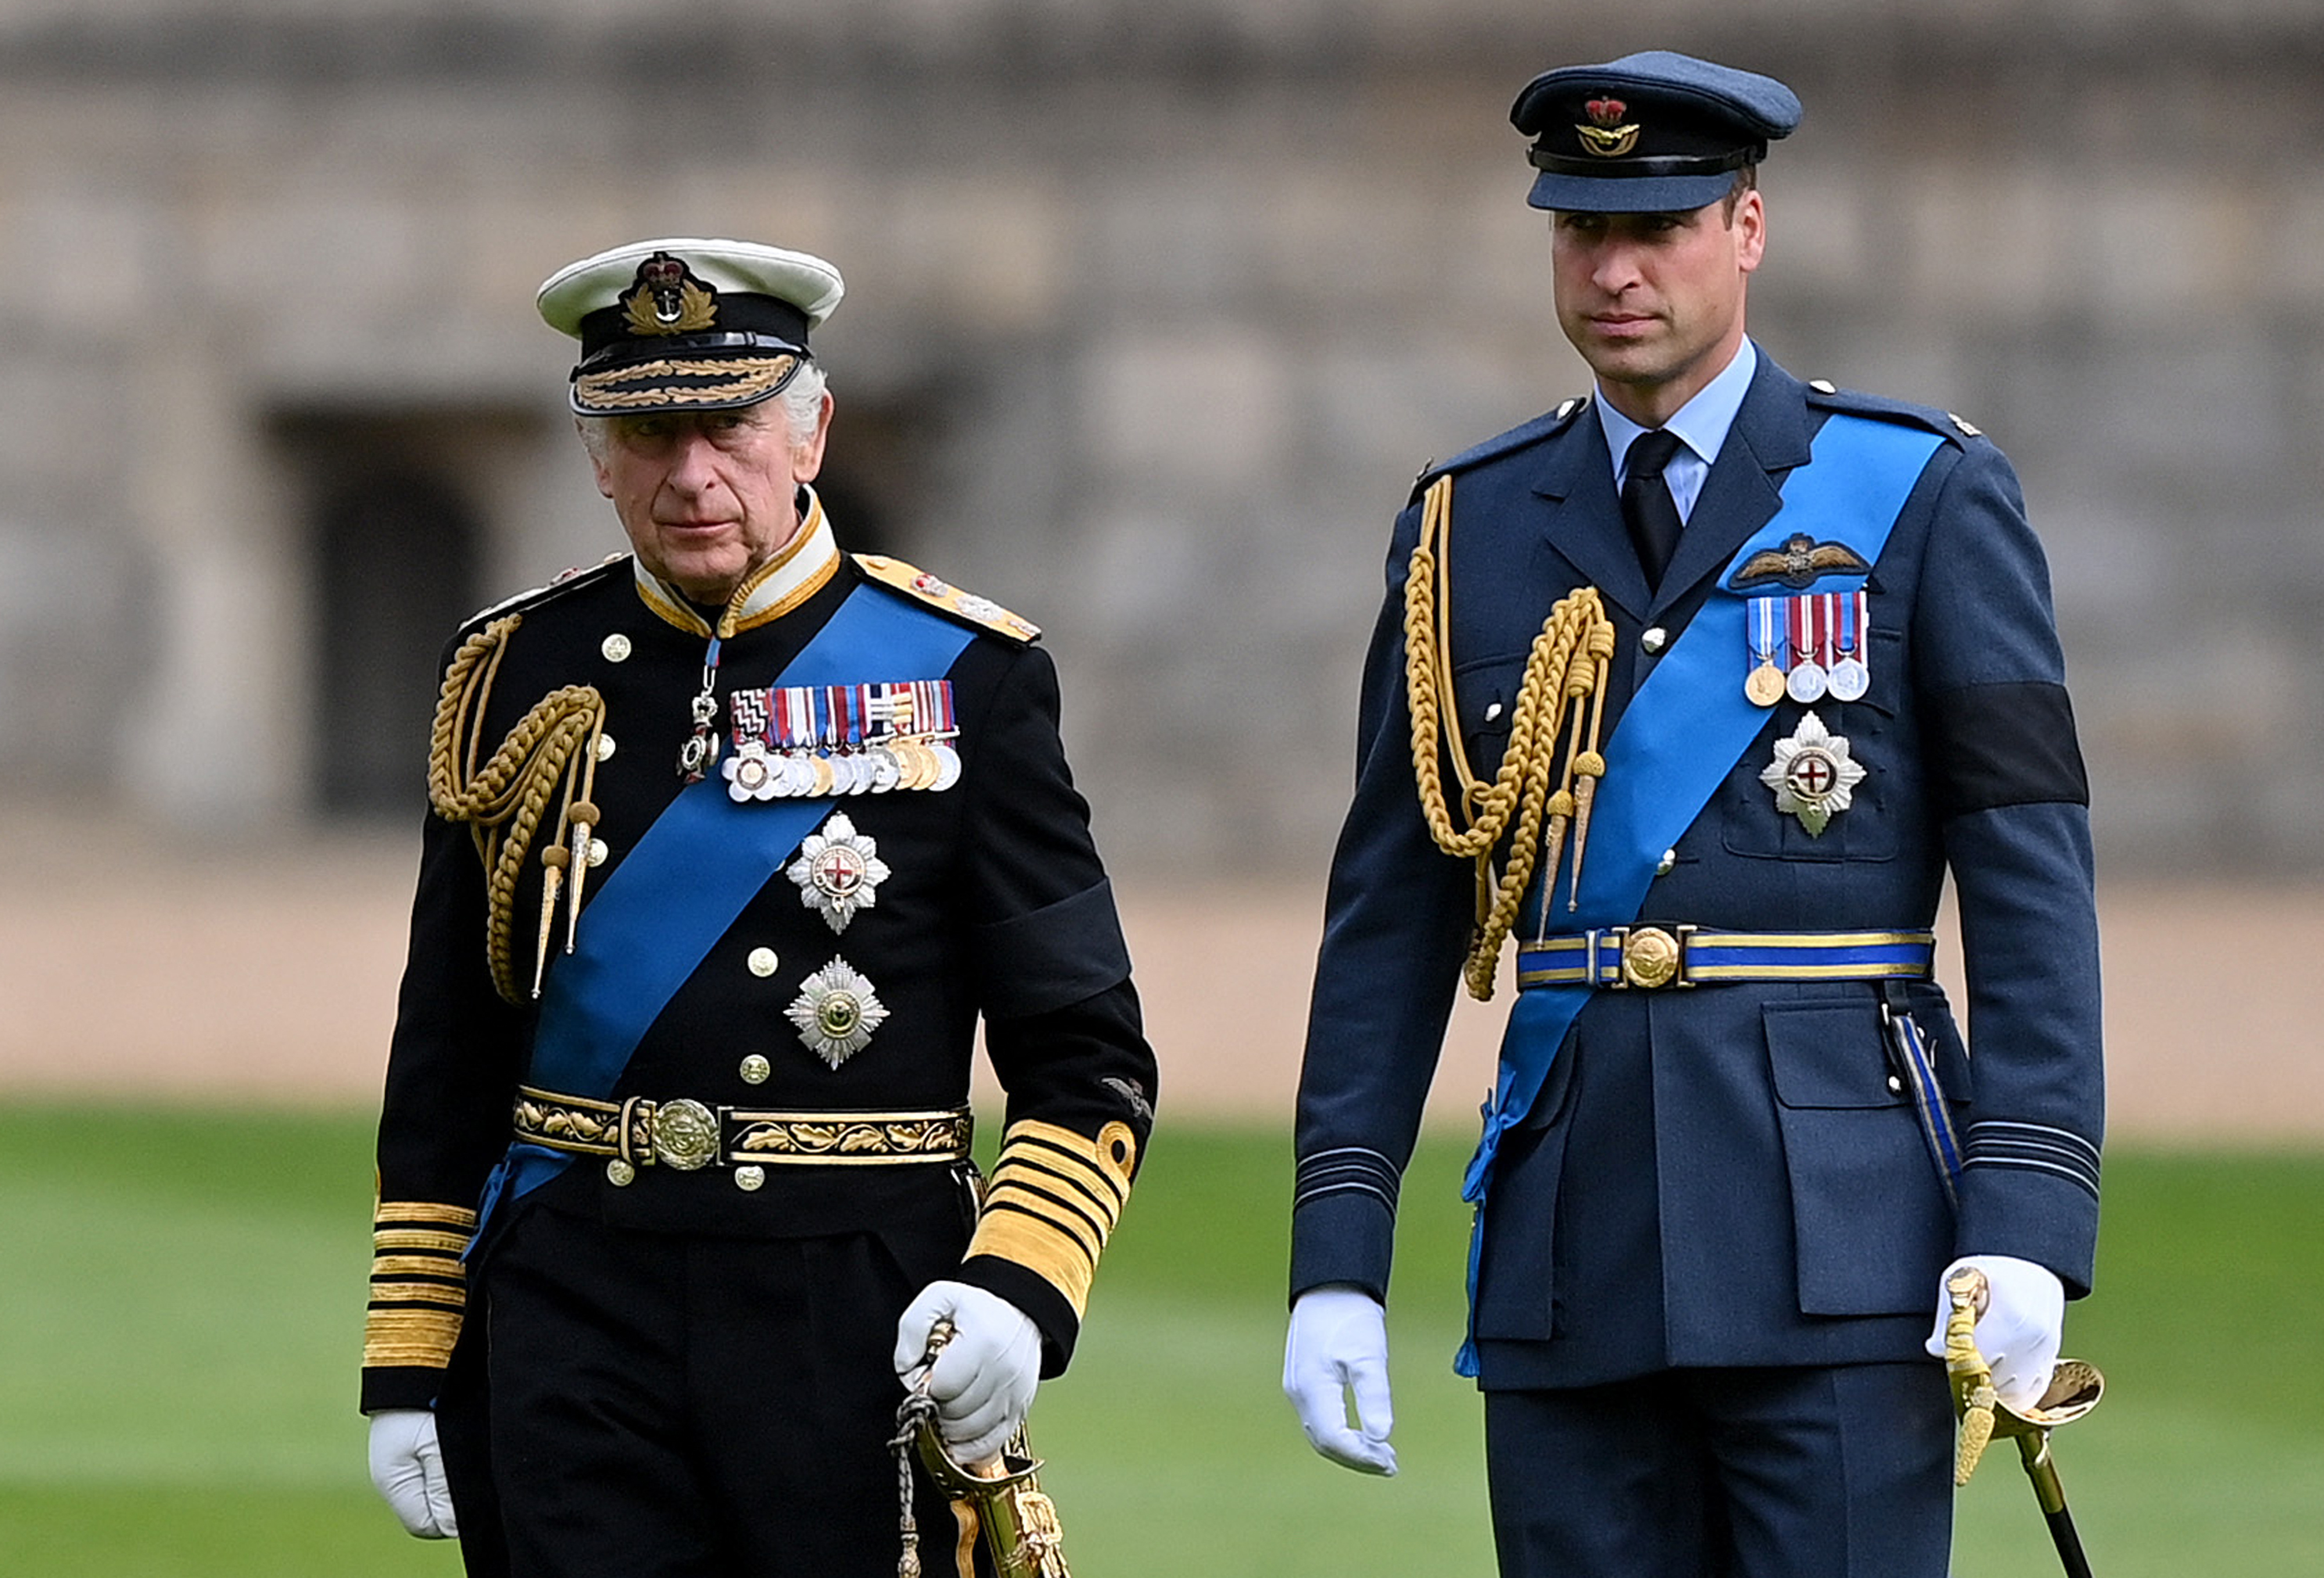 King Charles III and Prince William ahead of the Committal Service for the late Queen Elizabeth II in Windsor, England on September 19, 2022 | Source: Getty Images